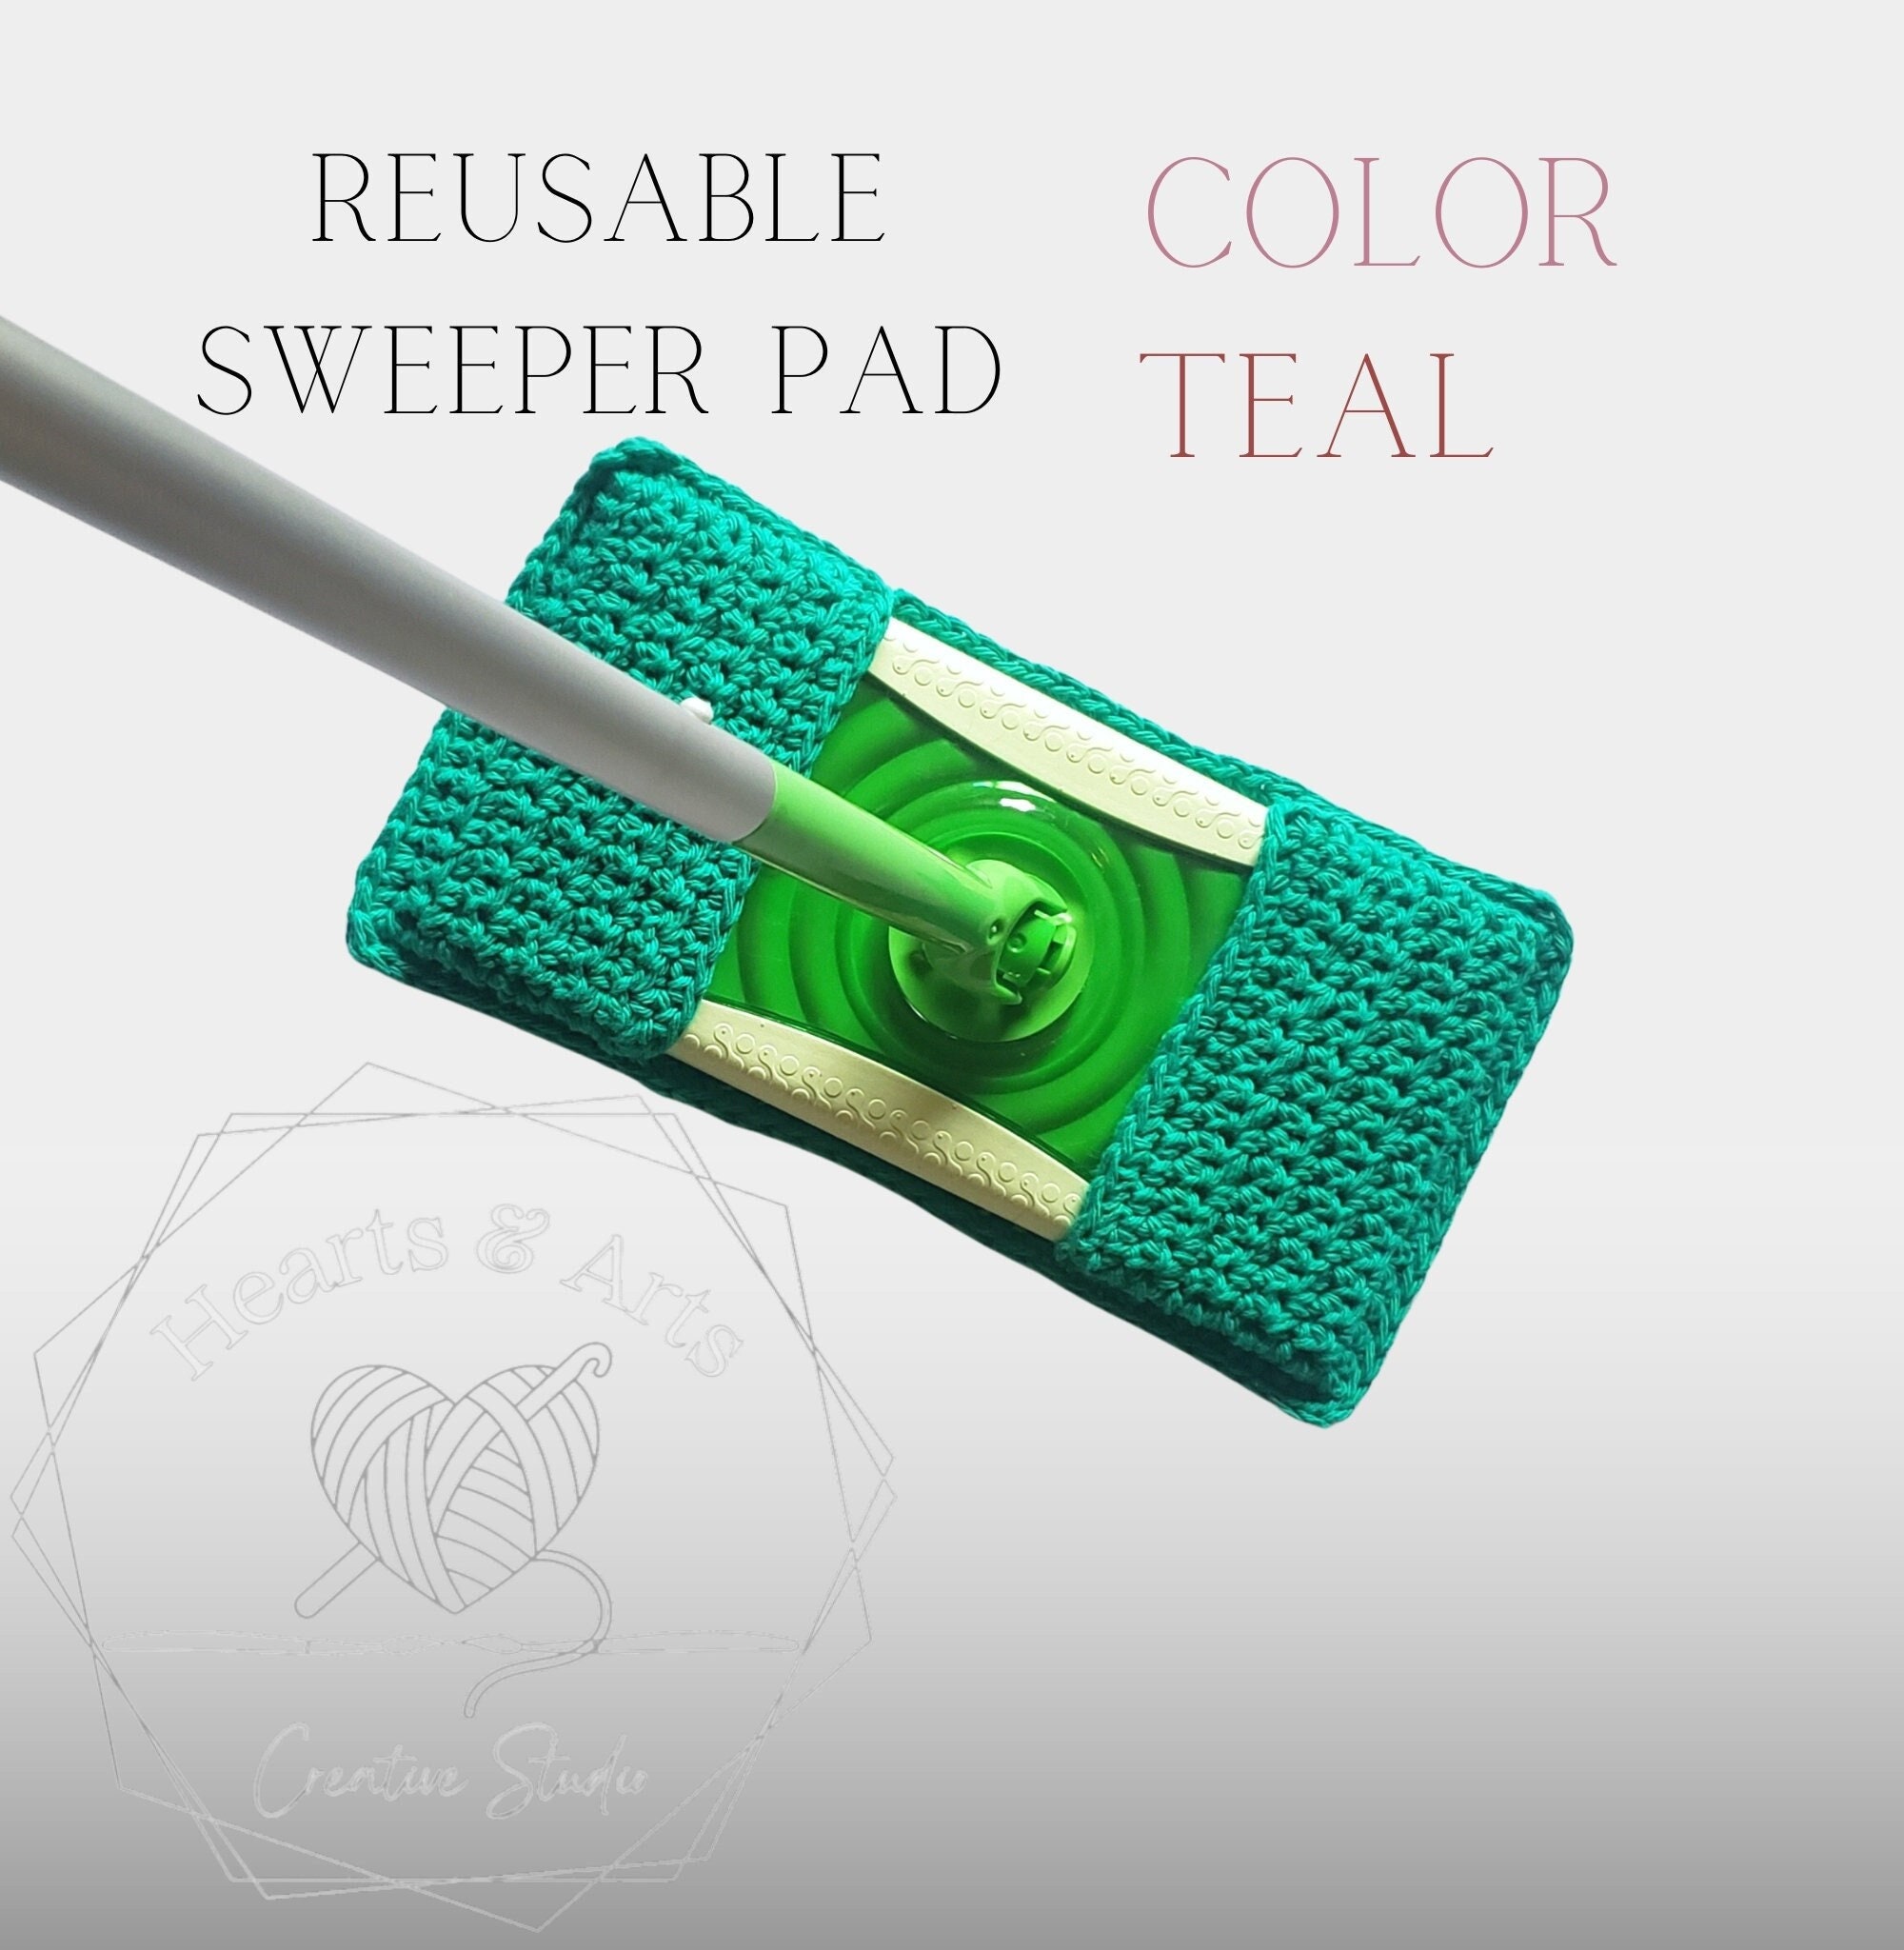 DIY Swiffer wet jet pads and solution - A little Rose Dust